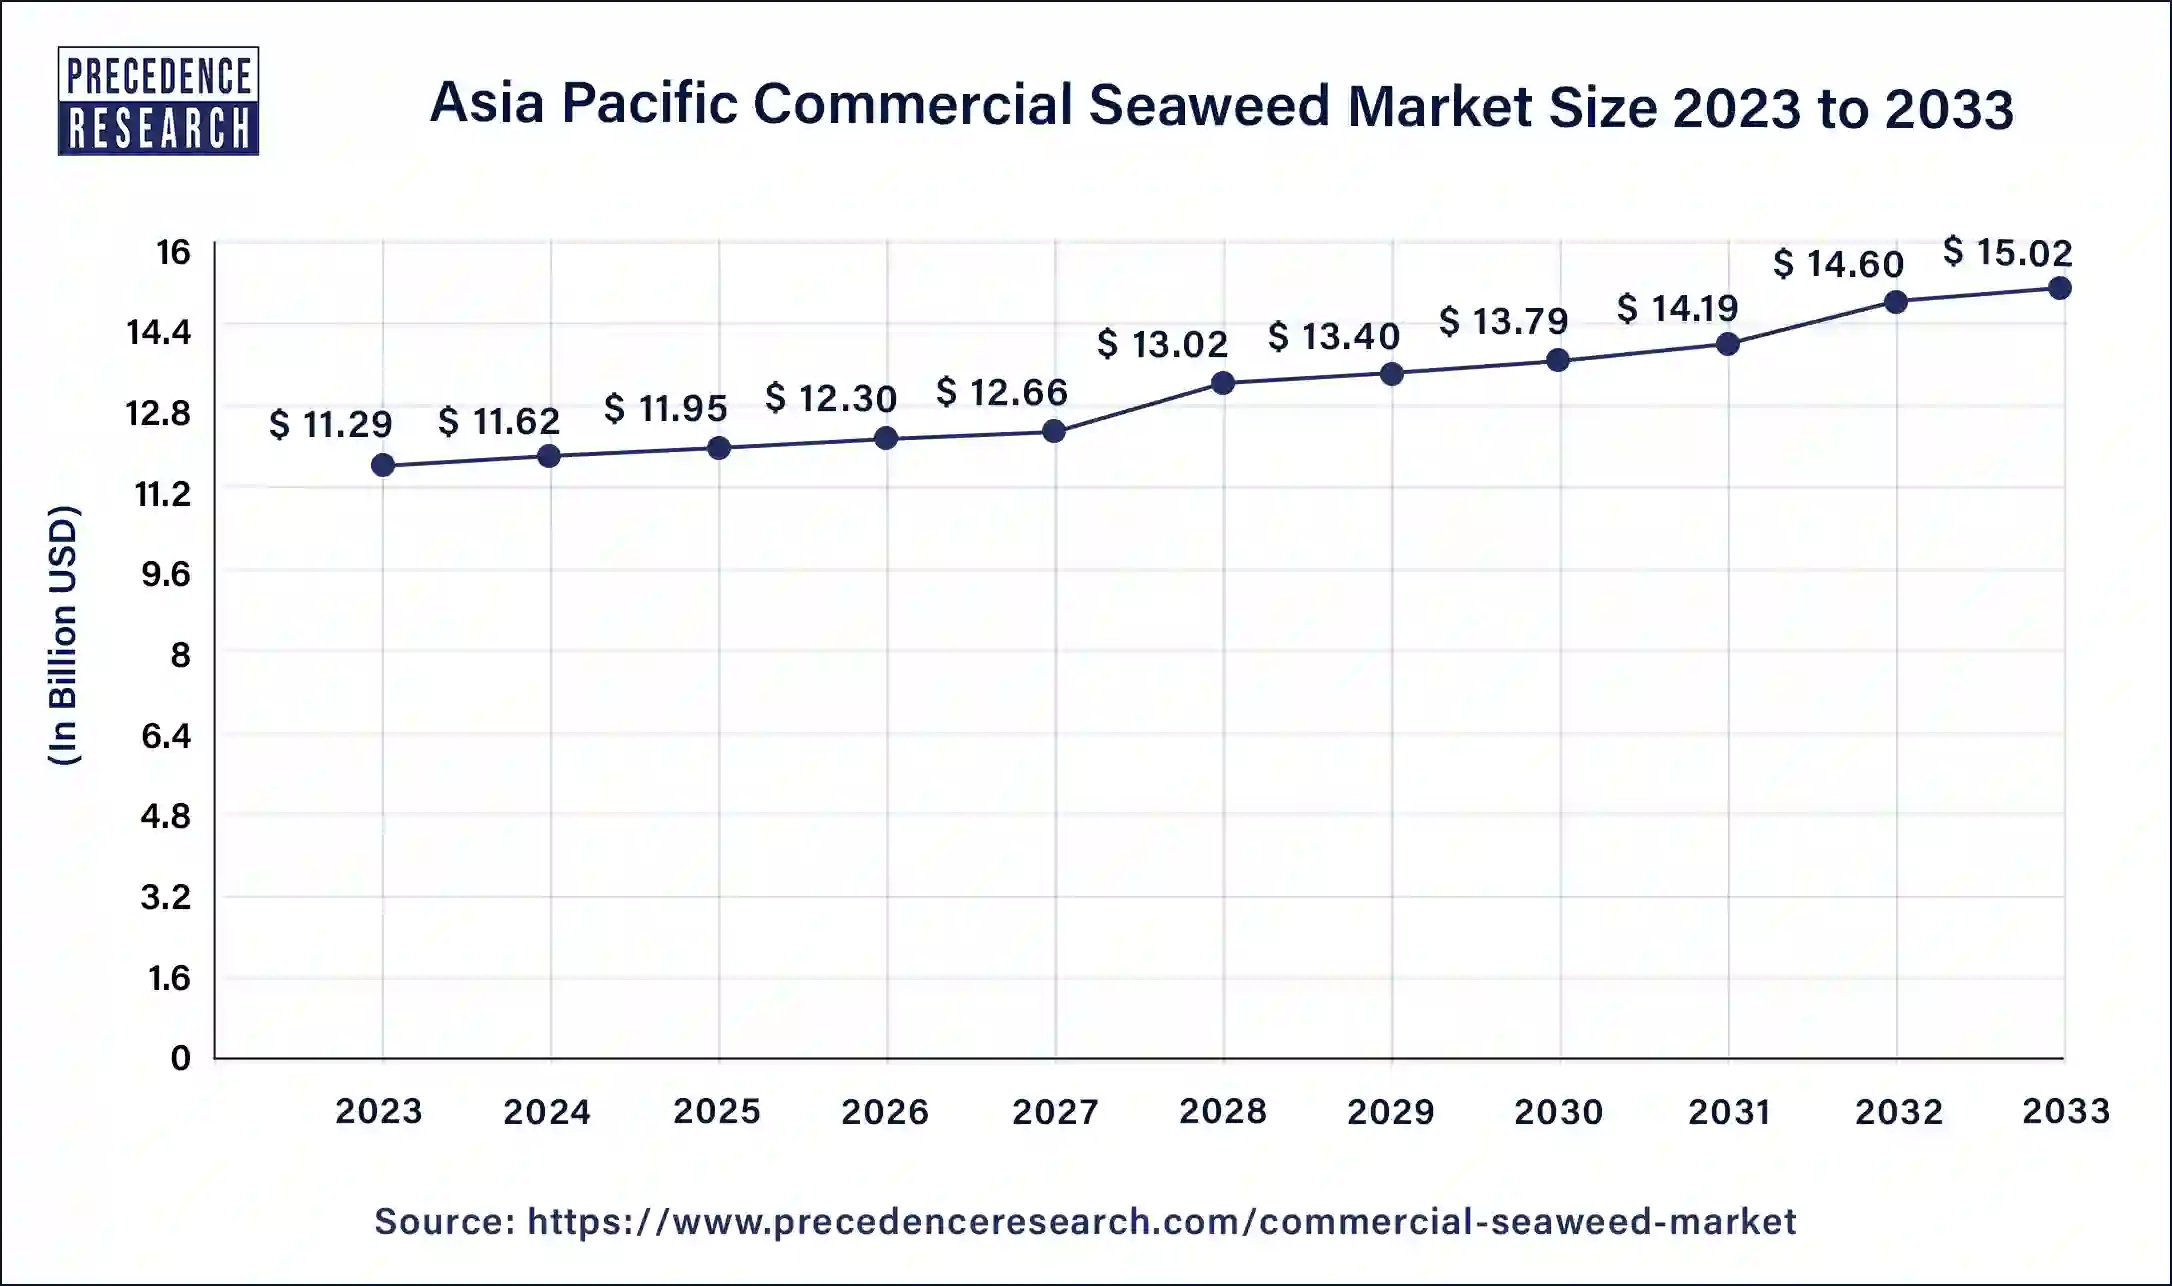 Asia Pacific Commercial Seaweed Market Size 2024 to 2033